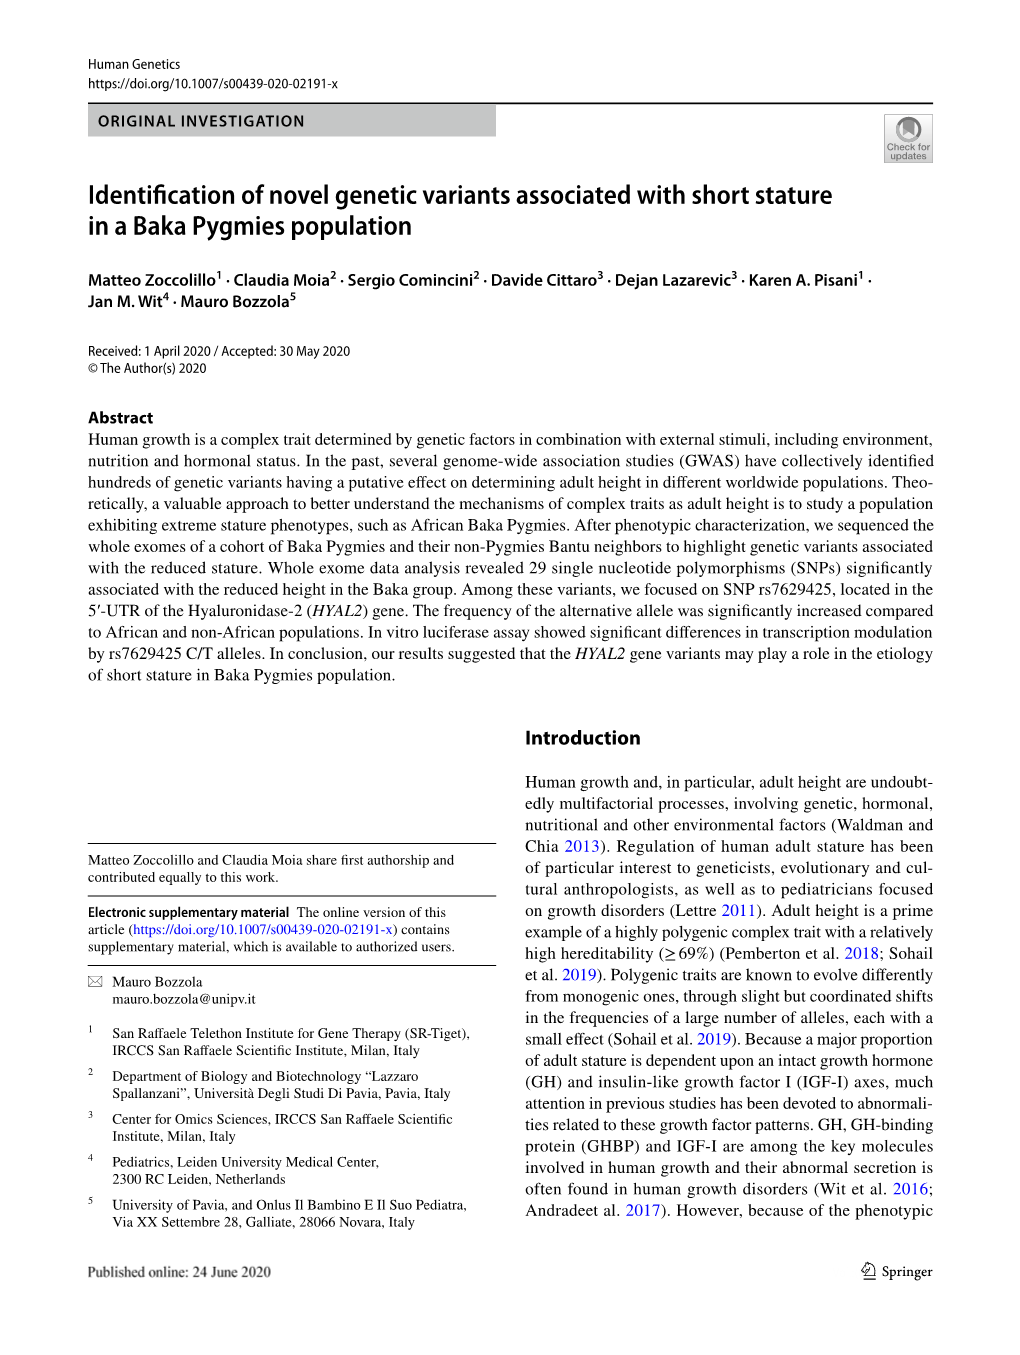 Identification of Novel Genetic Variants Associated with Short Stature in A